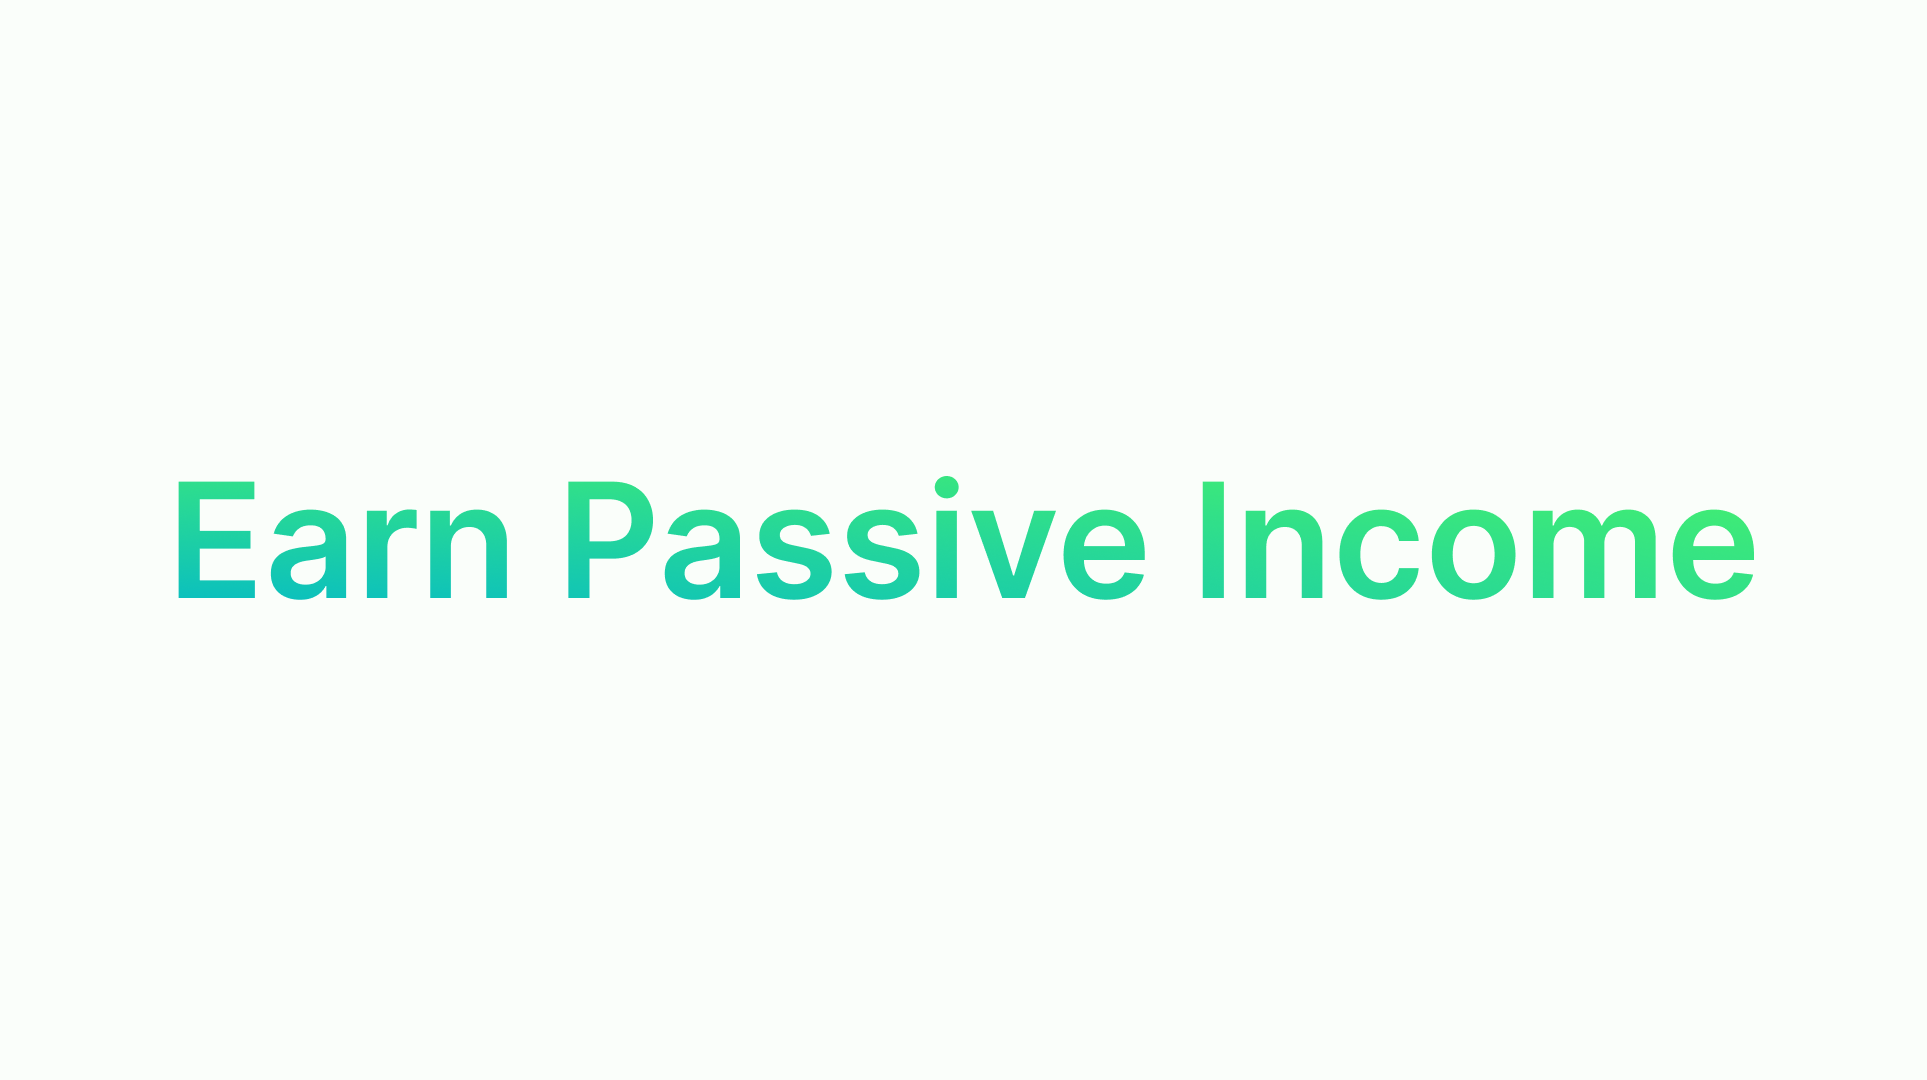 Earn Passive Income on Proptee